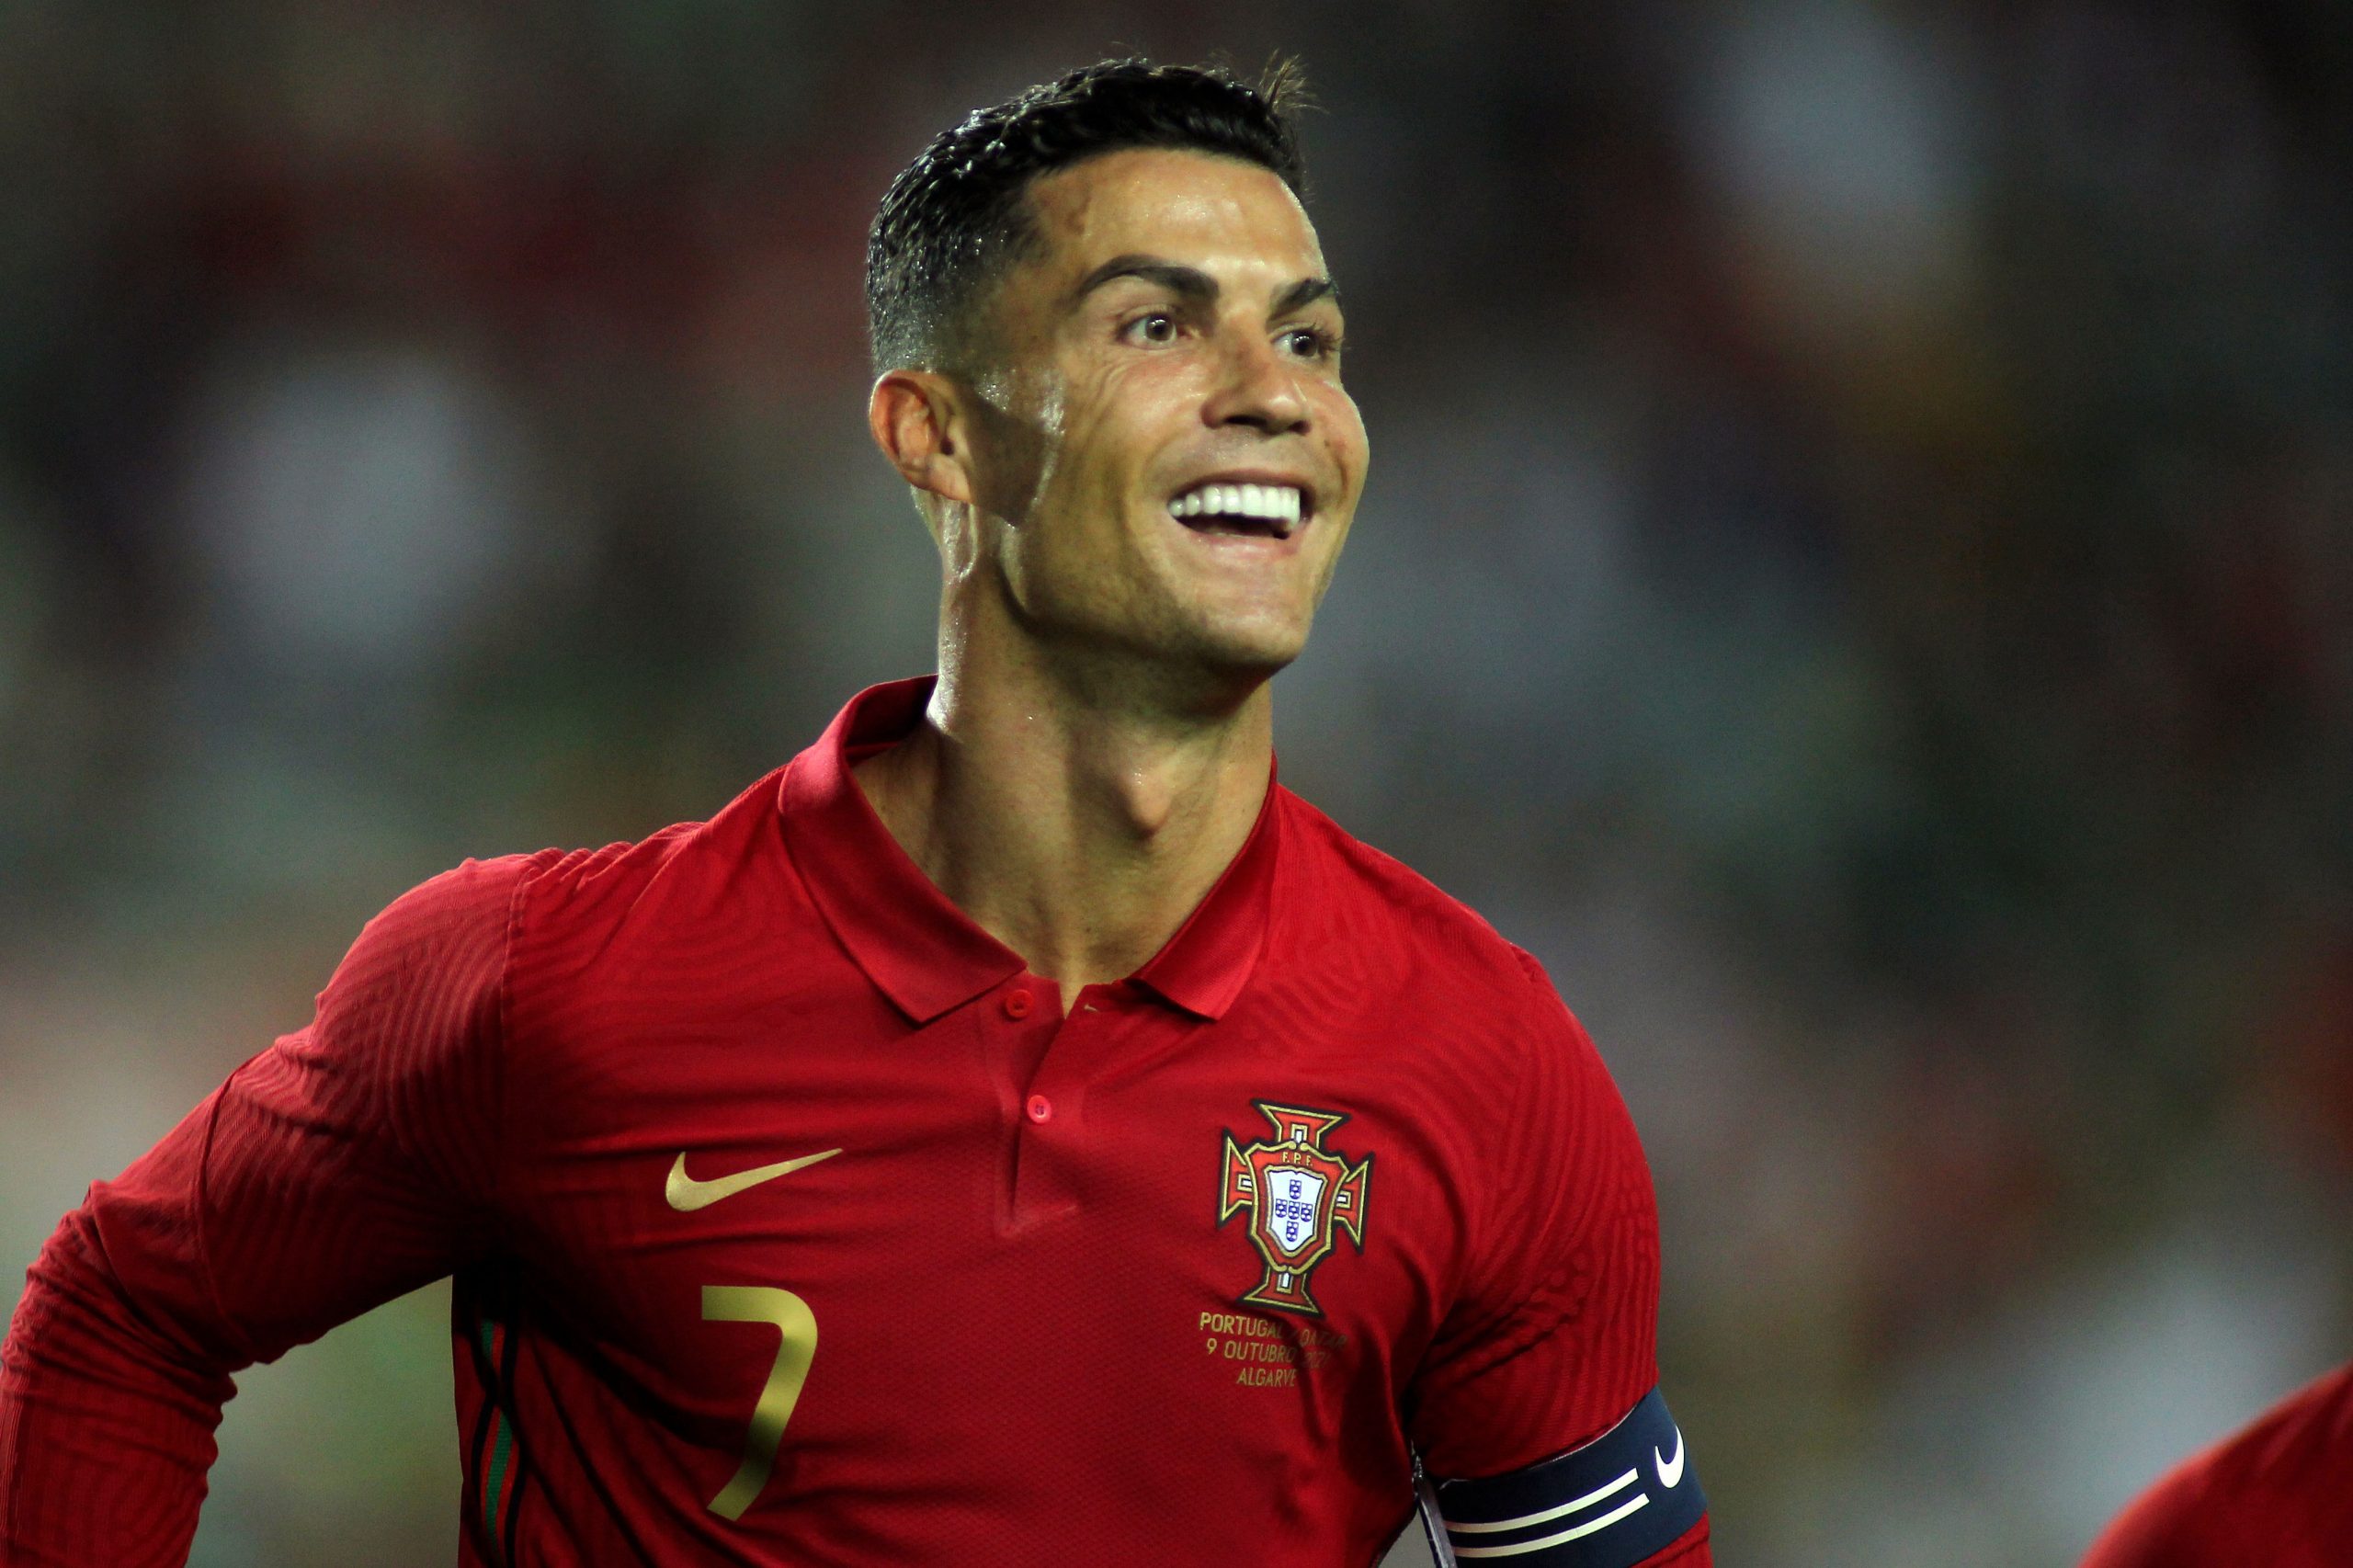 Cristiano Ronaldo becomes first person to reach 500 million followers on Instagram